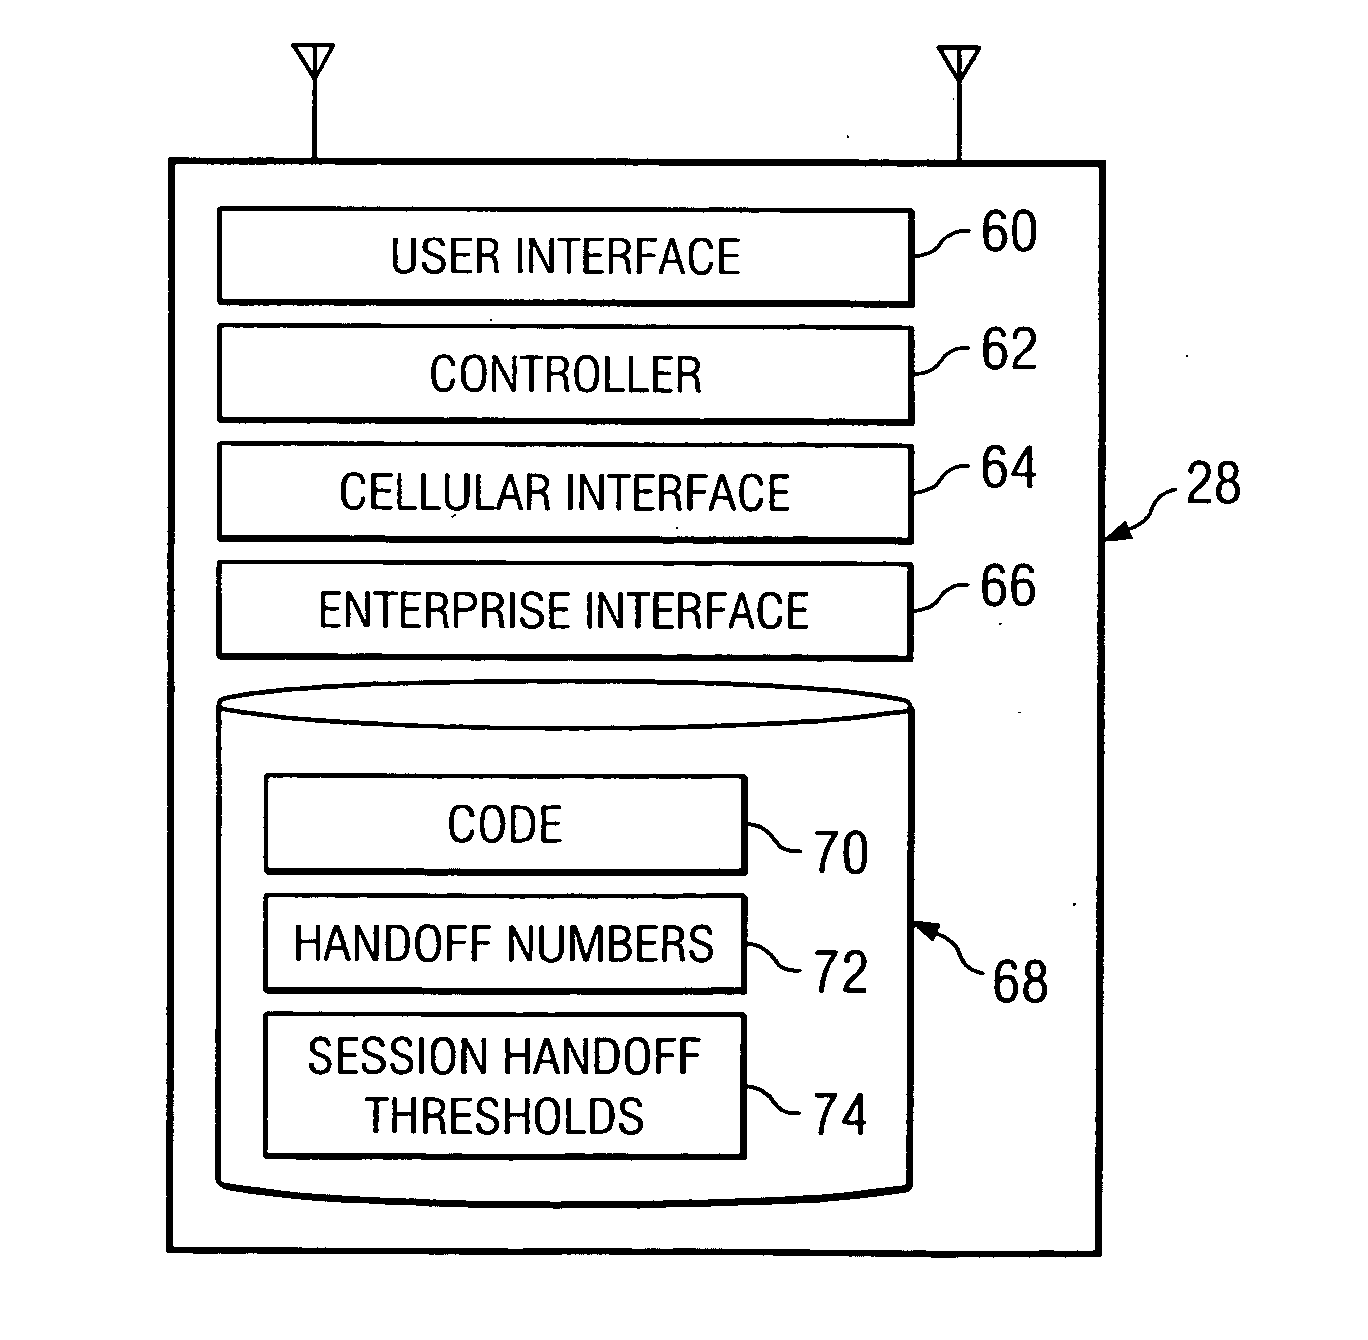 System and method for providing a handoff leg associated with a preexisting leg in a network environment